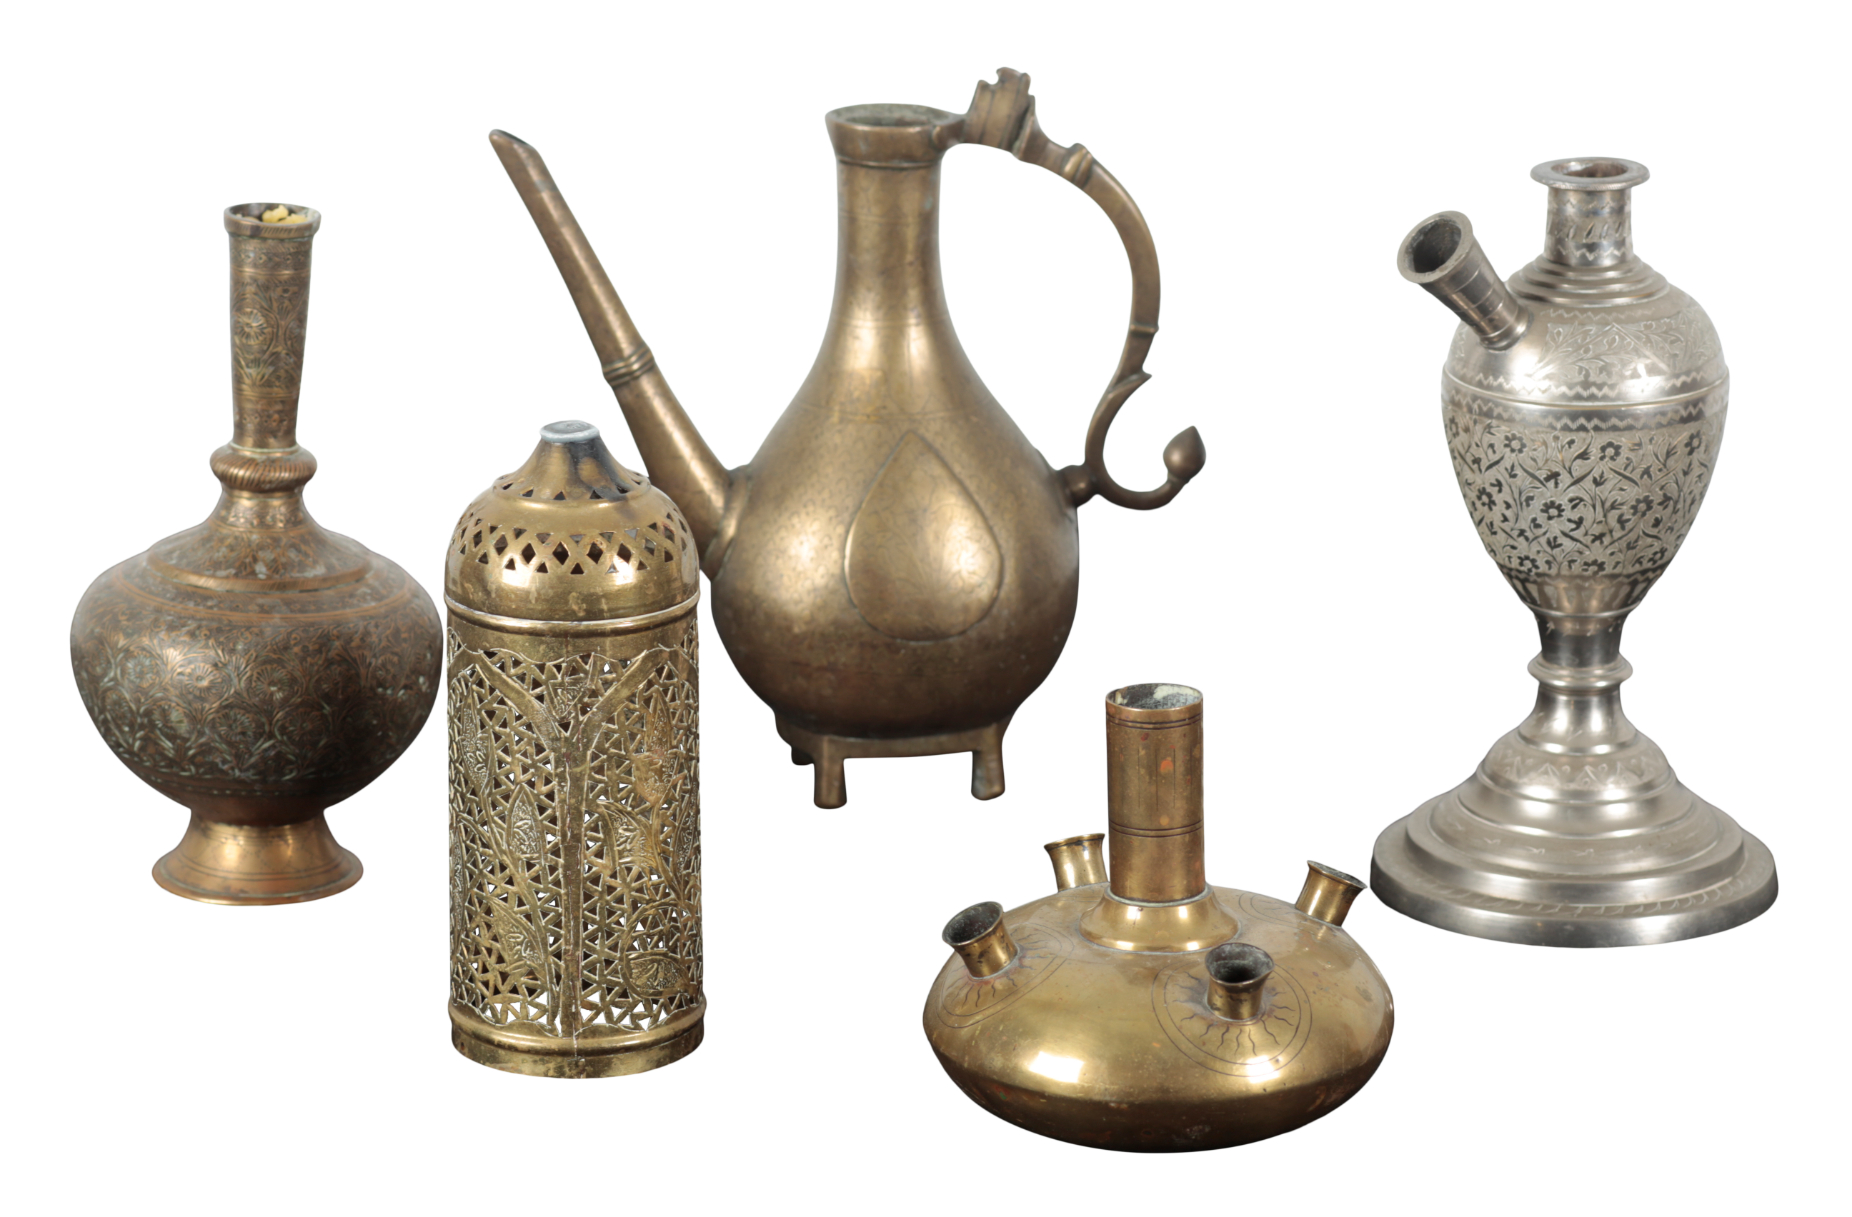 A SMALL COLLECTION OF EASTERN METALWARE 3ae03c